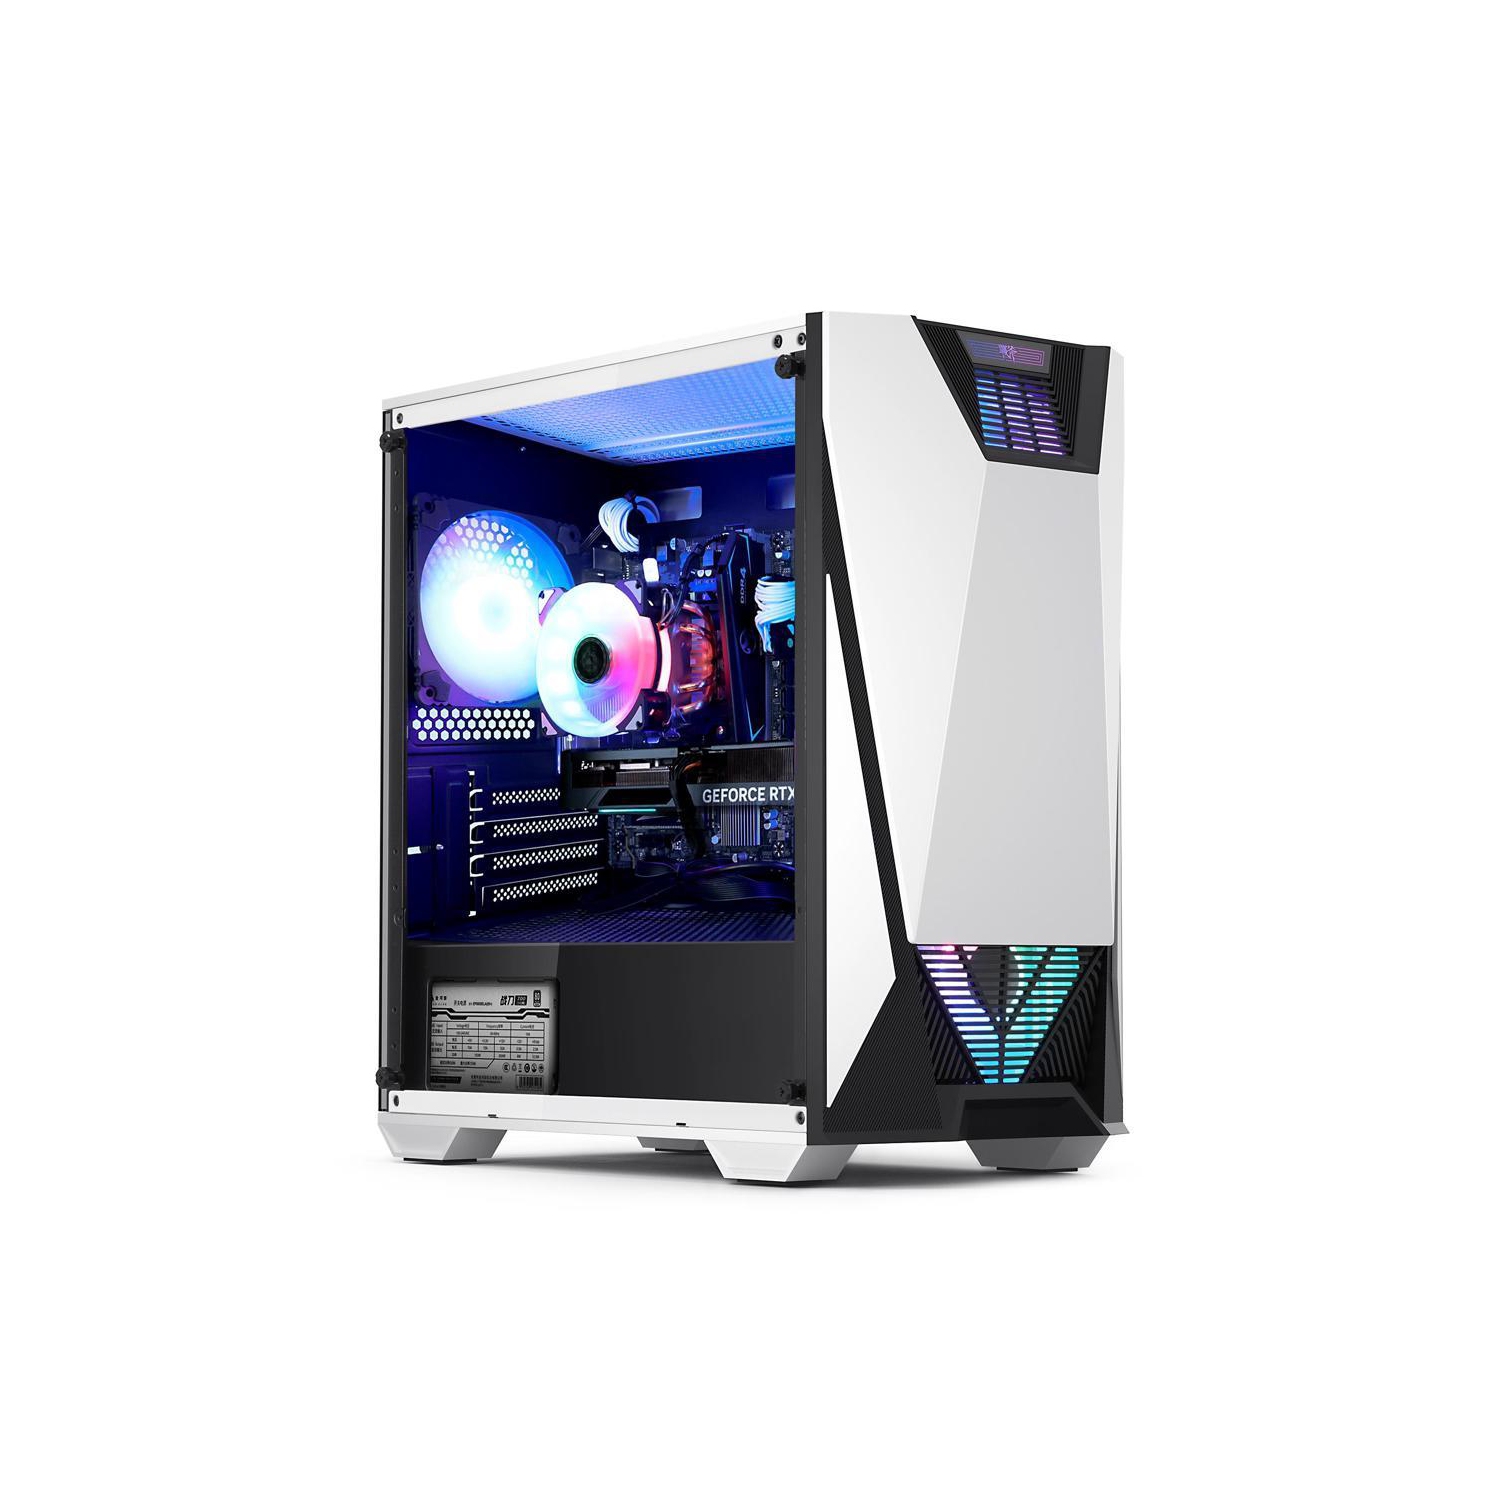 Hoengager Battleaxe Gaming - Intel Core i5-12600K 10-Core 3.7GHz-NVIDIA GeForce RTX 3060 Ti- 32GB DDR4 3200MHz - 2TB+500GB M.2 NVMe SSD- WIFI -RGB Fans - Windows 11 Pro Computer